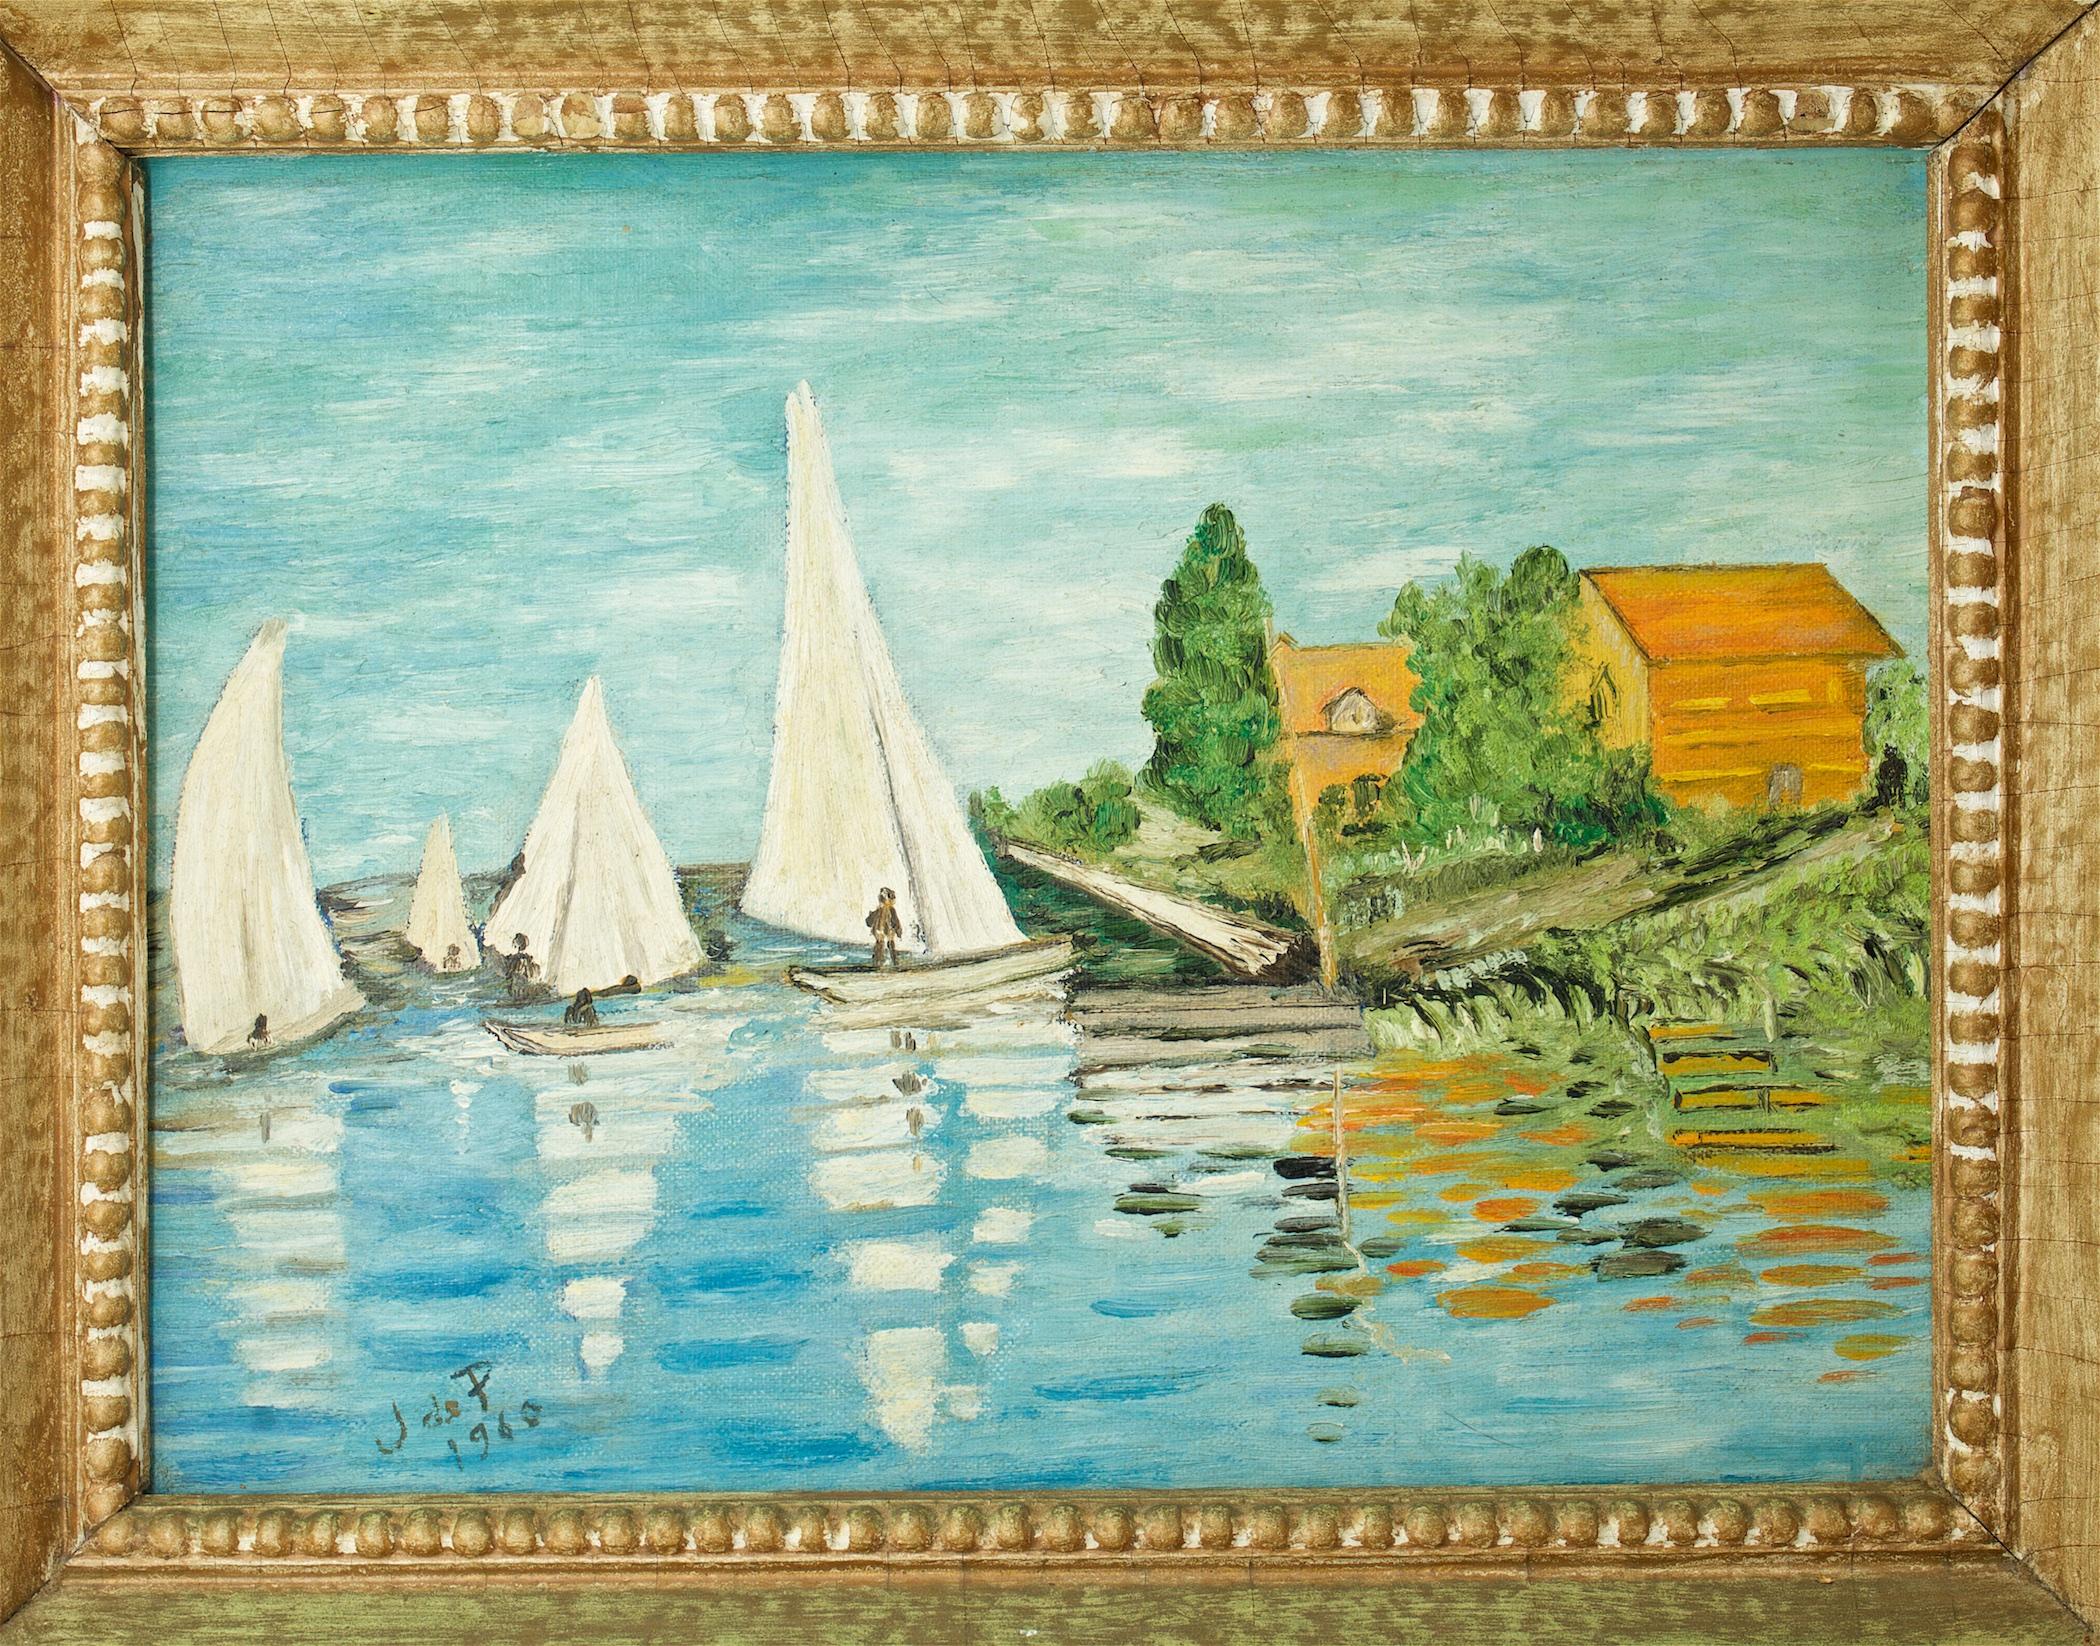 A wonderful 1960s Parisian oil painting, a Tourist Street Souvenir, by artist J. de P. of the Regatta at Argenteuil originally by Claude Monet. In original frame. Oil on Board, pencil signed or dated on back, de P, Sept. 60. Image size 12 x 9 in.